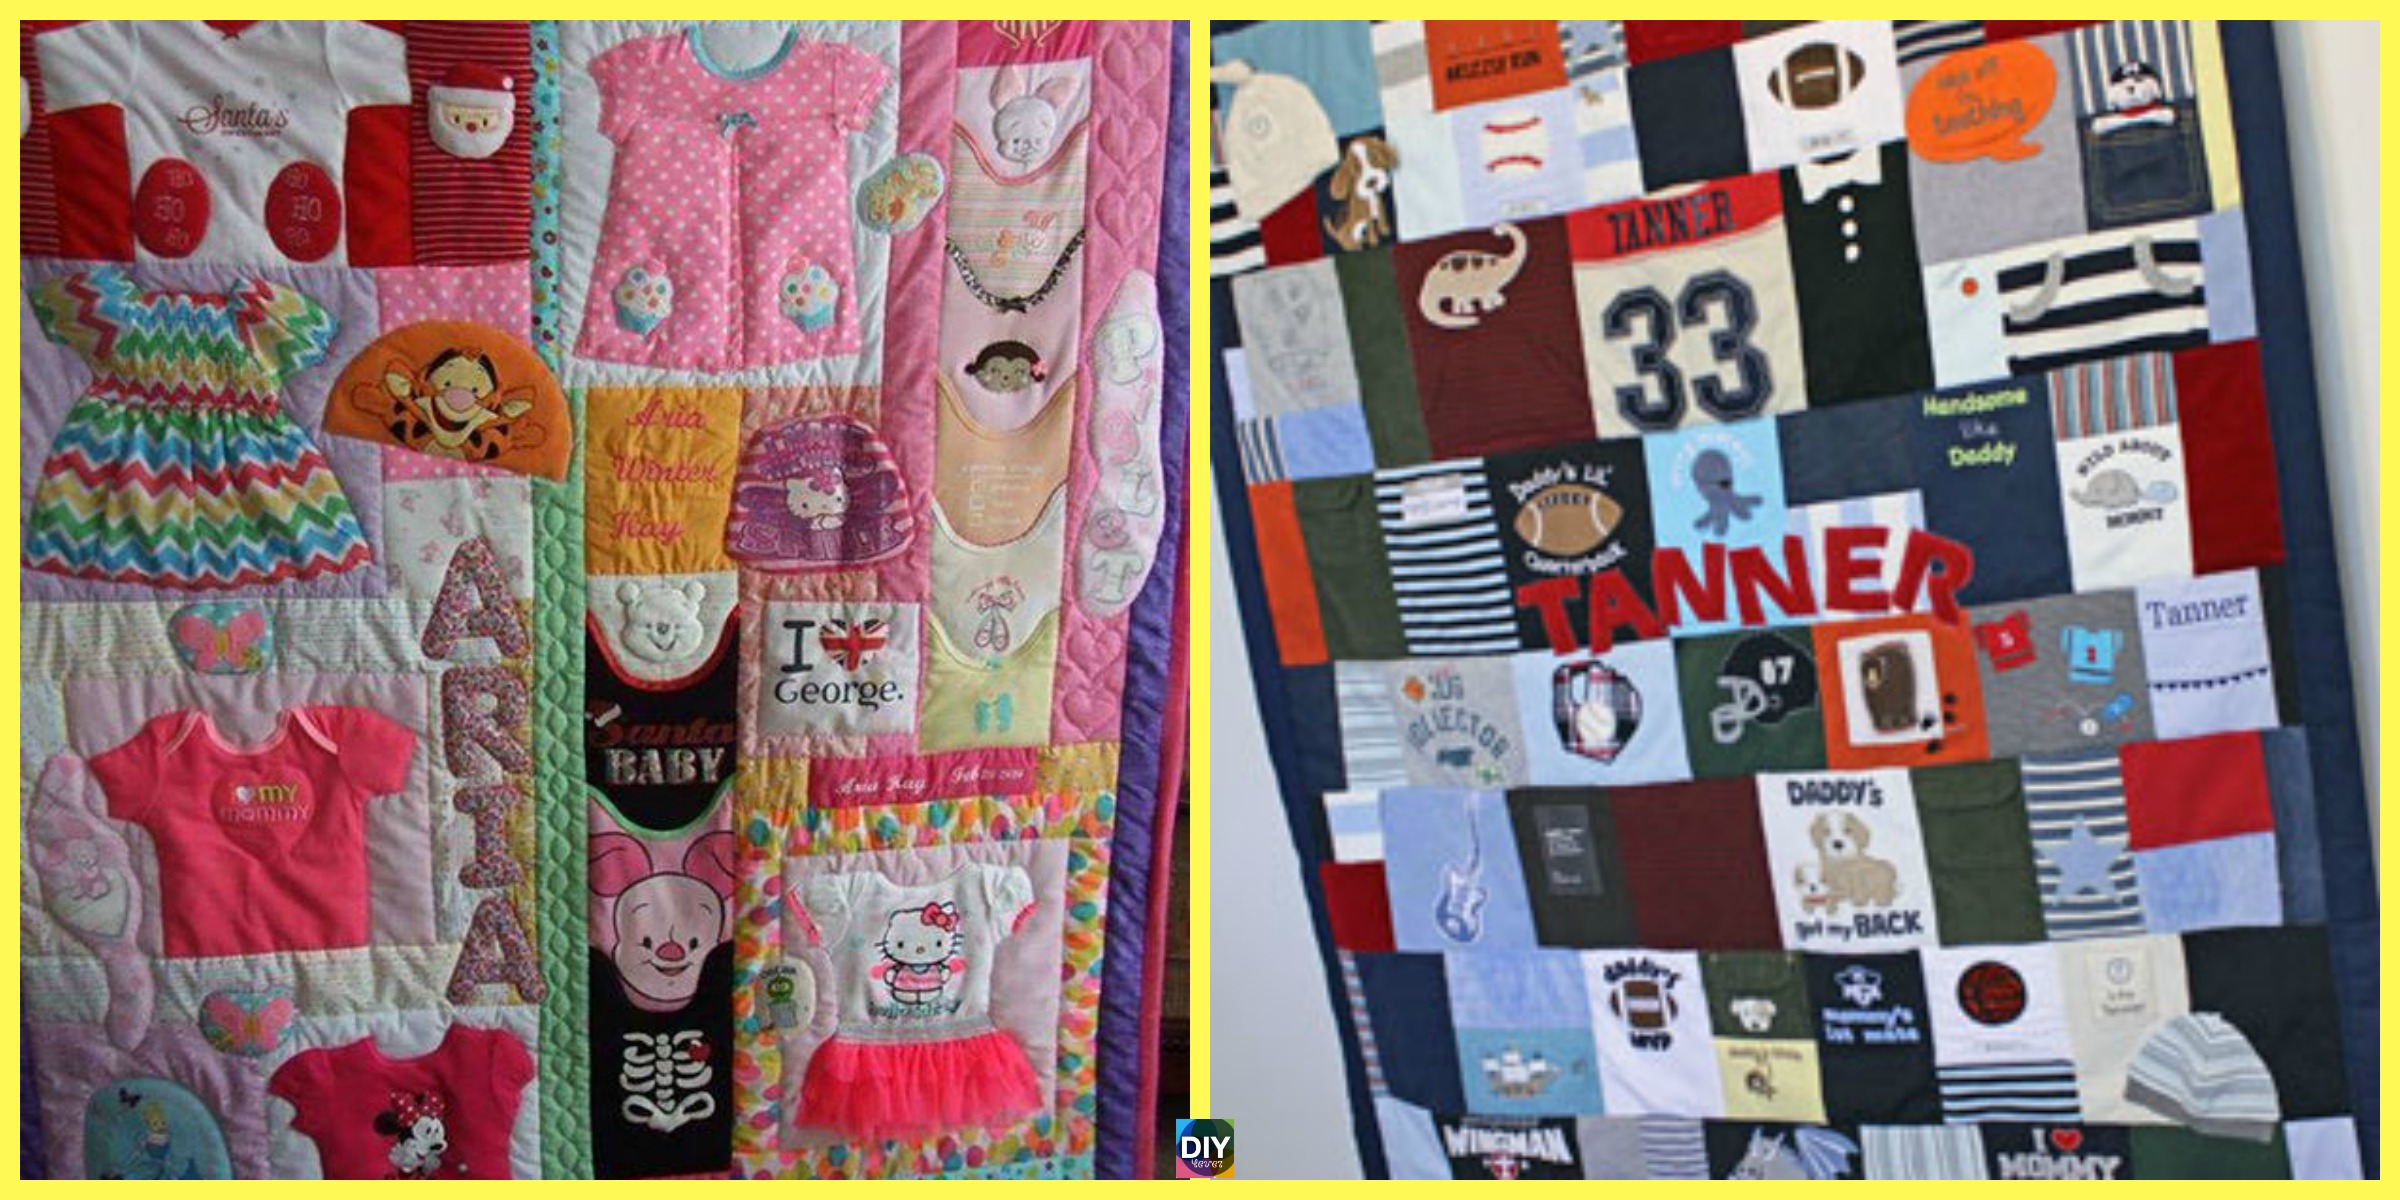 diy4ever- How to DIY Memory Baby Clothes Quilts